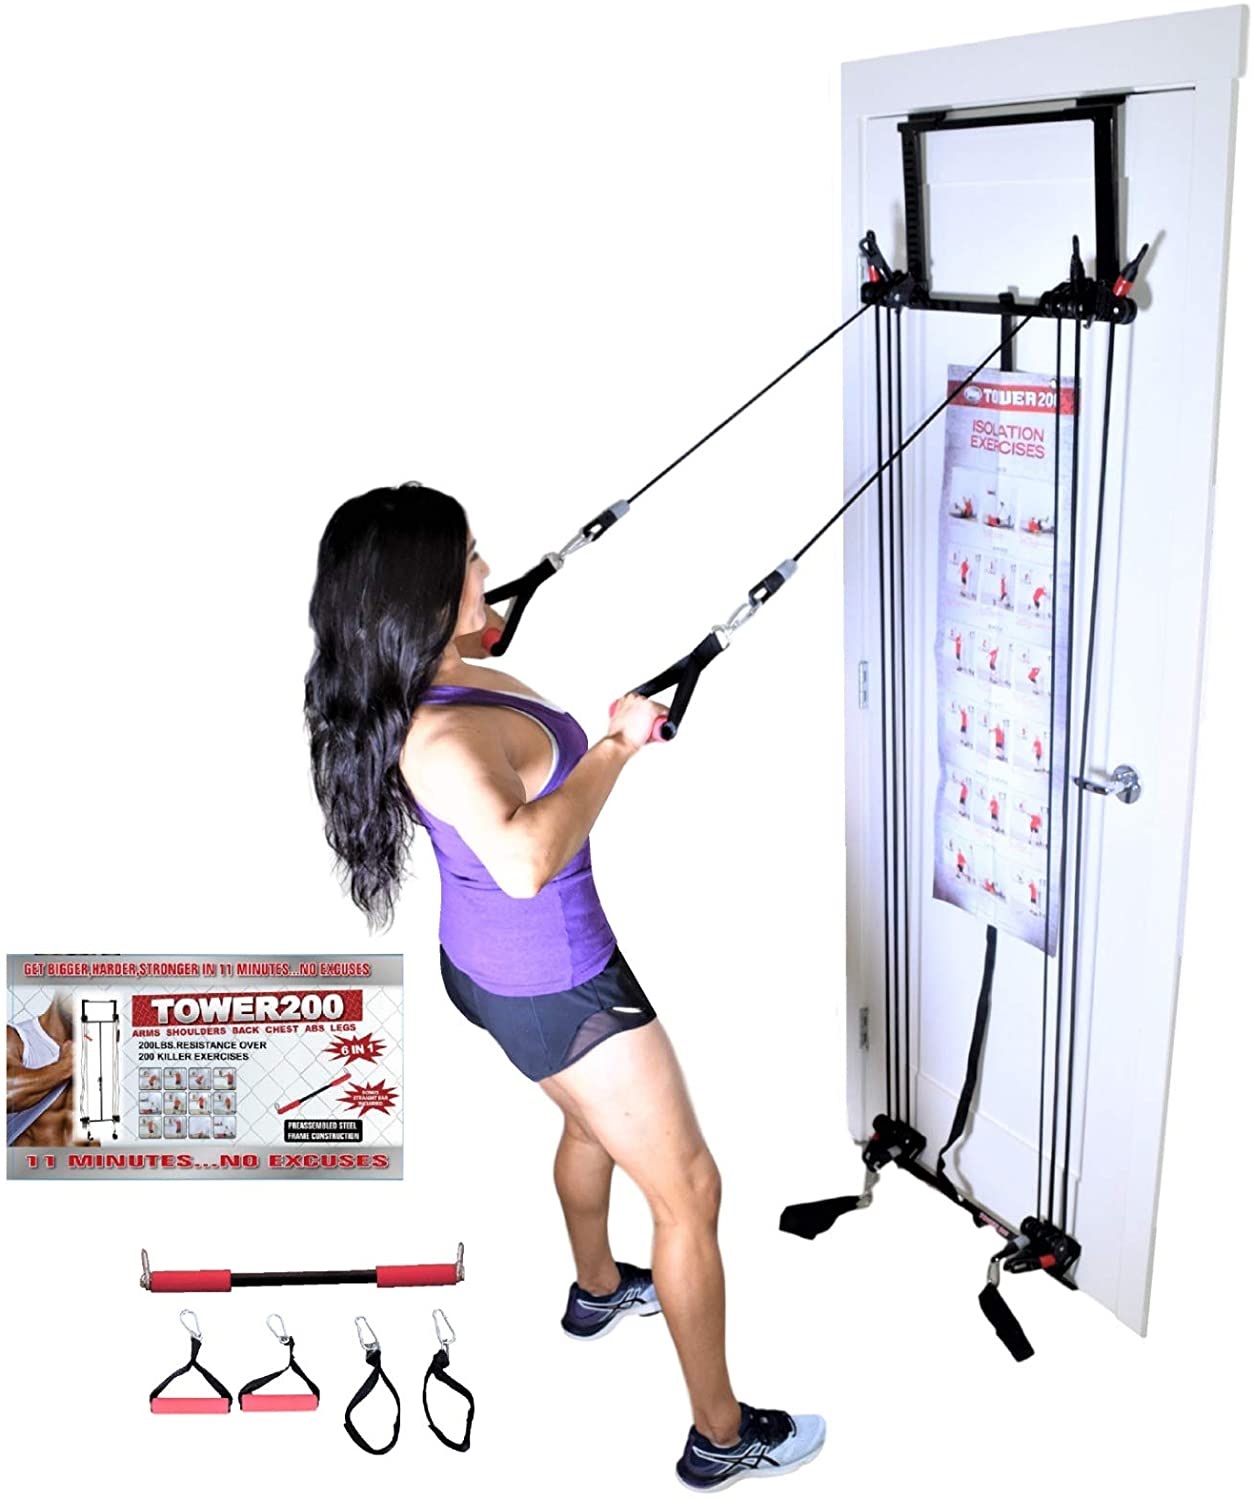 Tower 200 Door Gym Full Body Exercise Fitness Total Home Gym with 6'x2' Exercise Mat Workout System Strength Training with Straight Resistance Bar, DVD, Exercise Chart - image 2 of 13